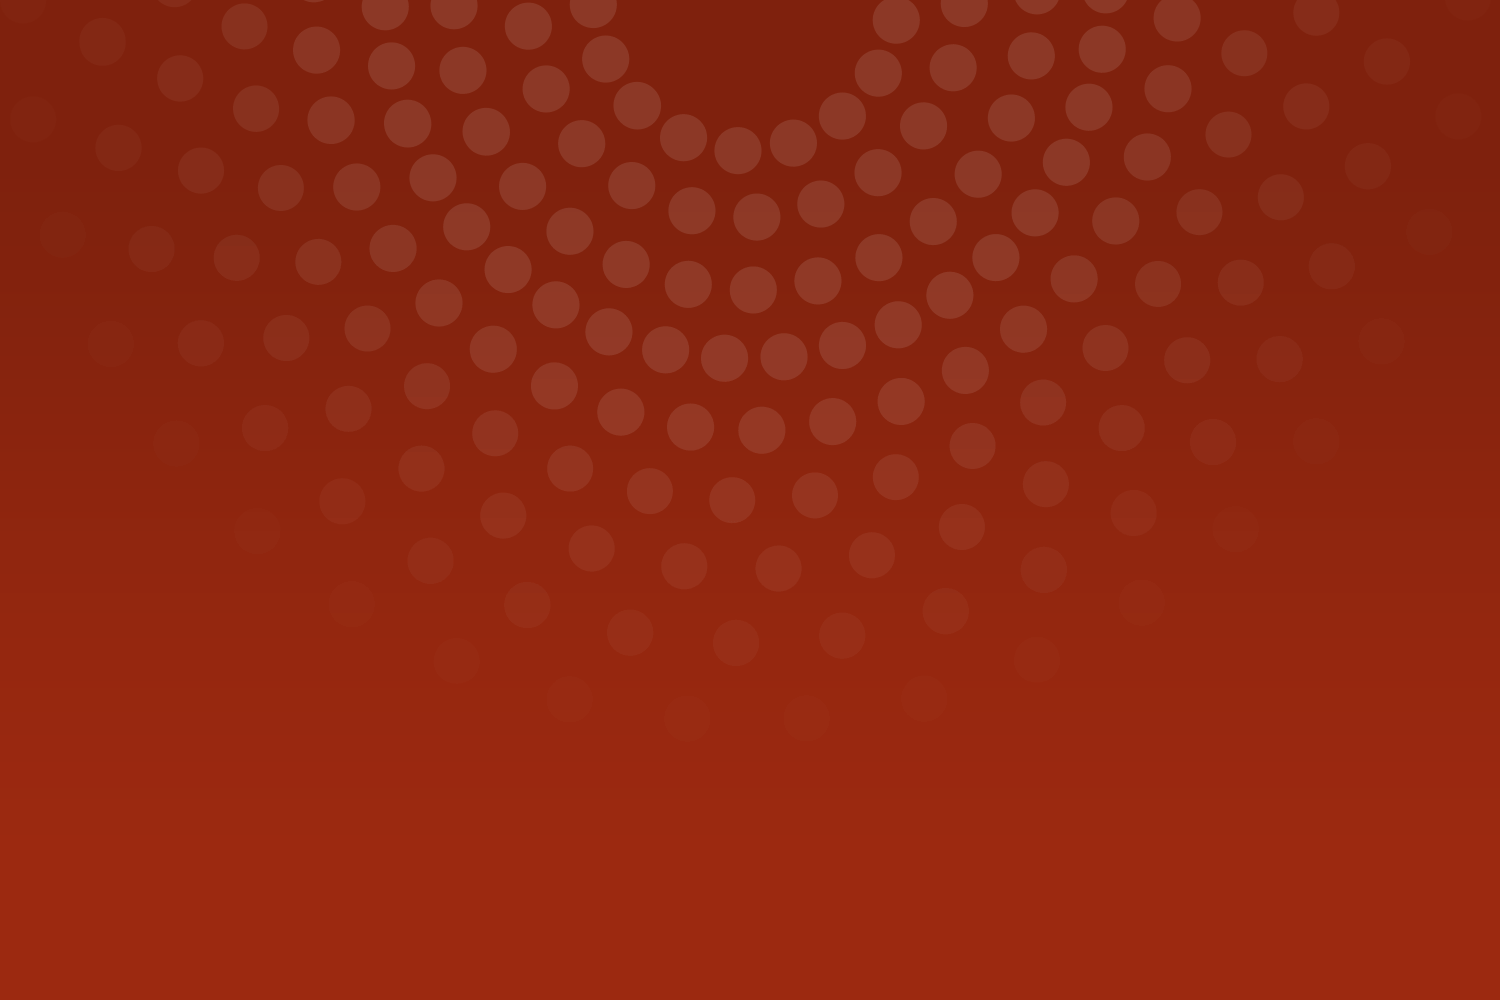 Abstract radiance art on red background